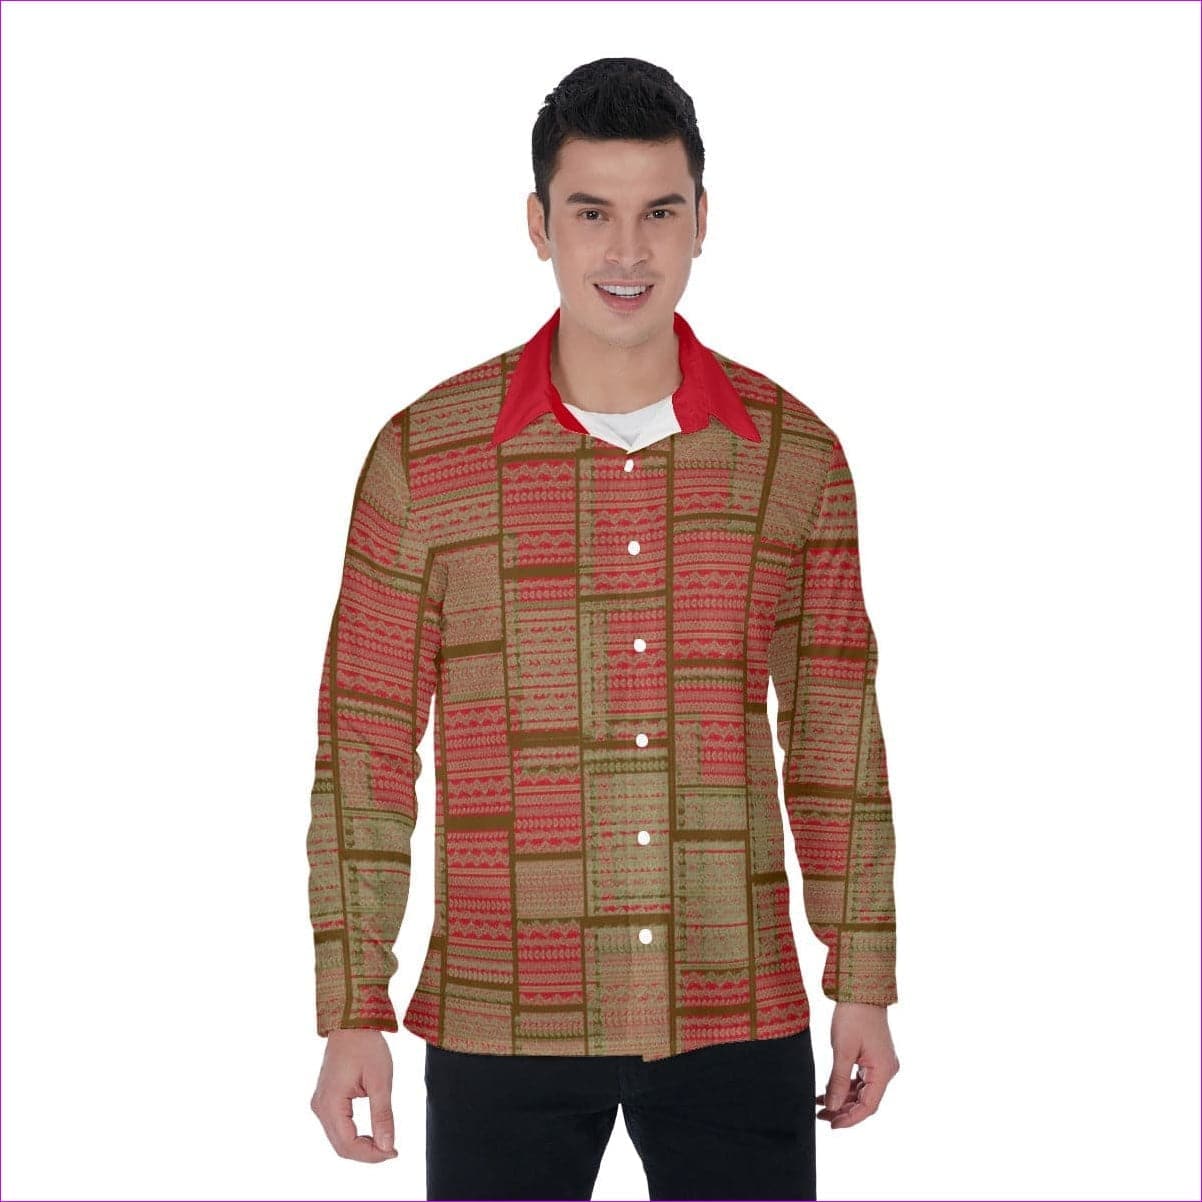 Red Chained 2 Men's Long Sleeve Button-Up Shirt - men's button-up shirt at TFC&H Co.